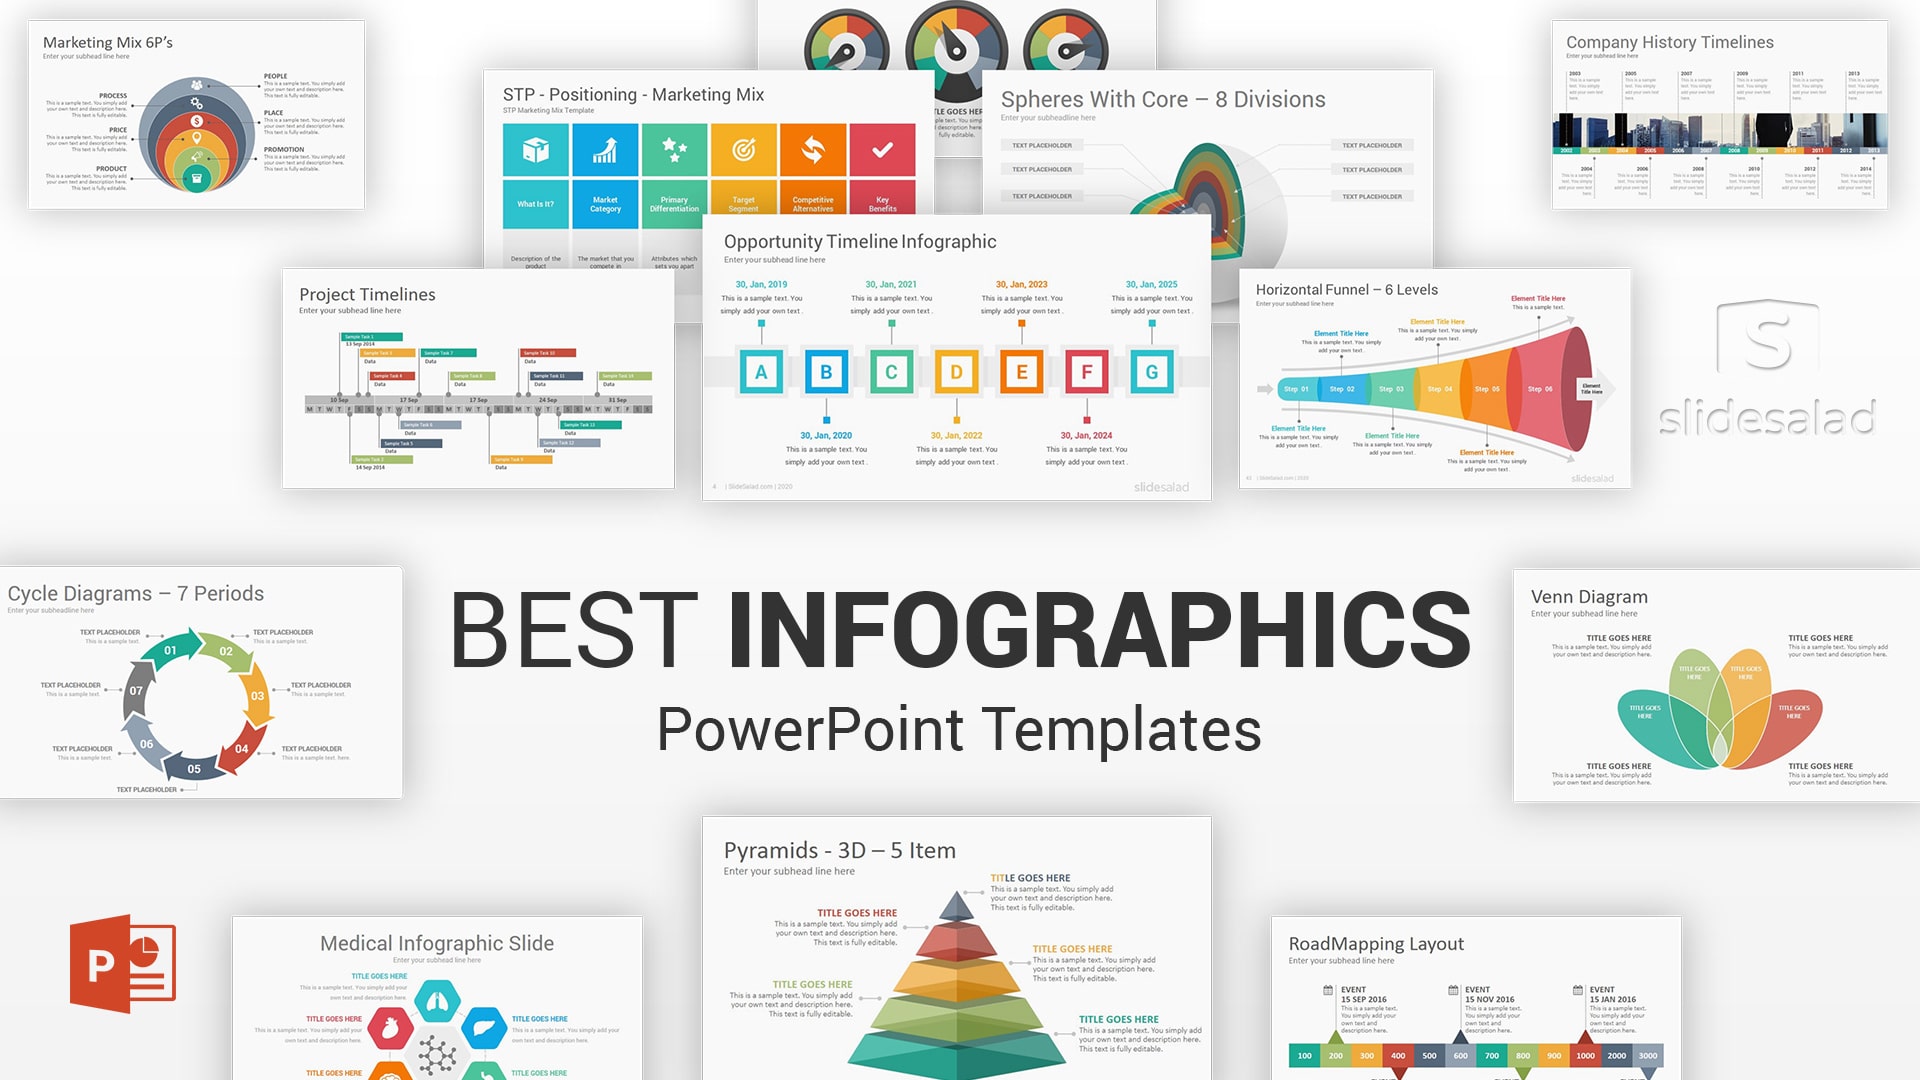 Best Infographics PowerPoint Templates for Presentations